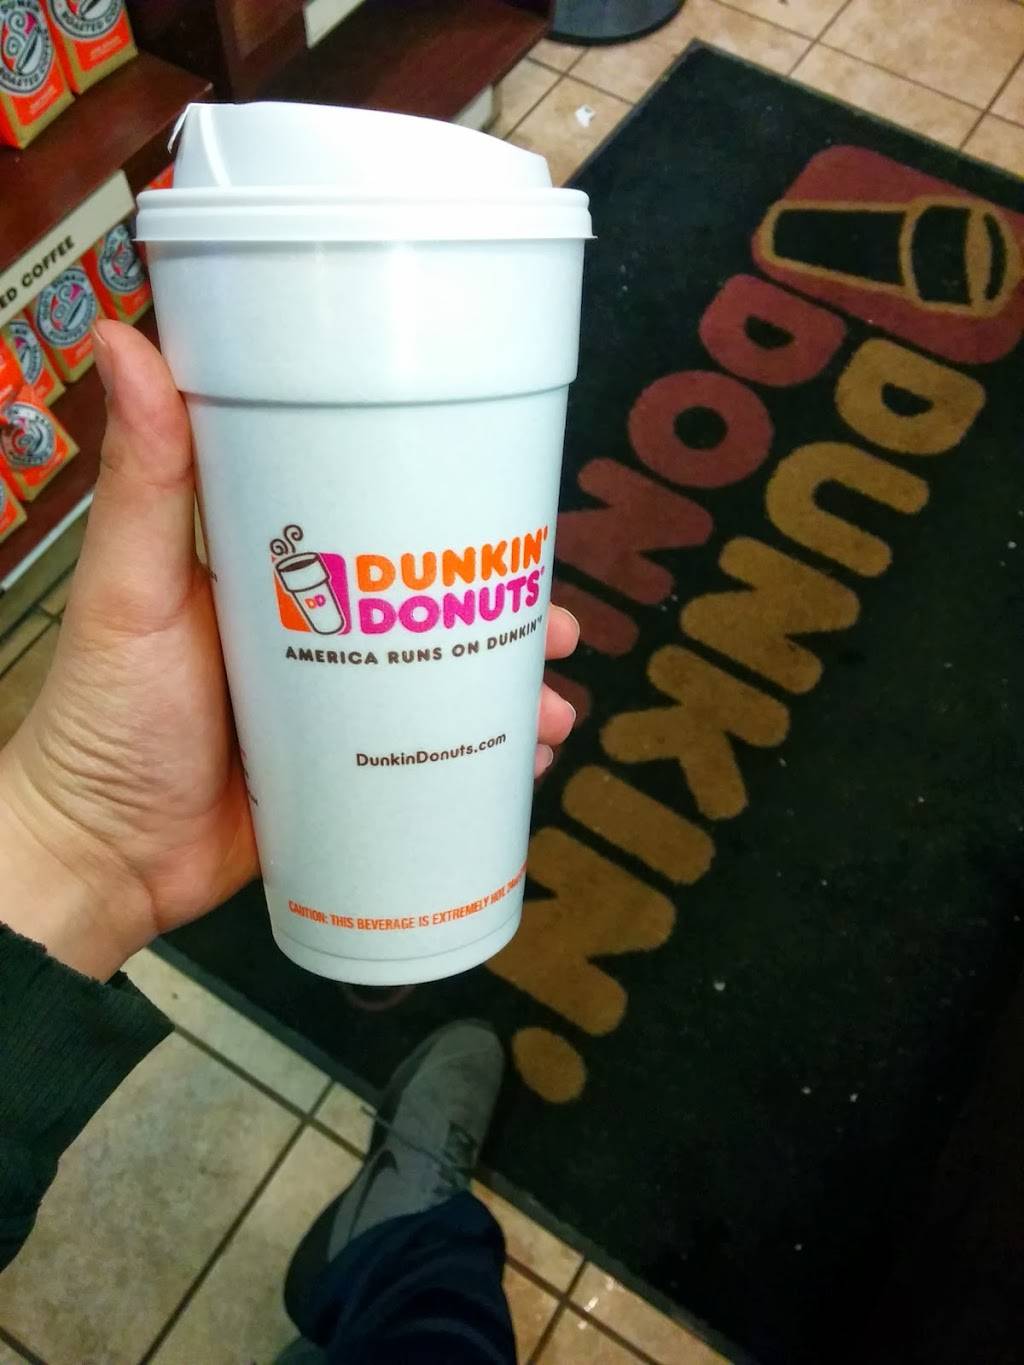 Dunkin Donuts | cafe | 222 South Bergen Boulevard, Fairview, NJ 07022, USA | 2019417476 OR +1 201-941-7476